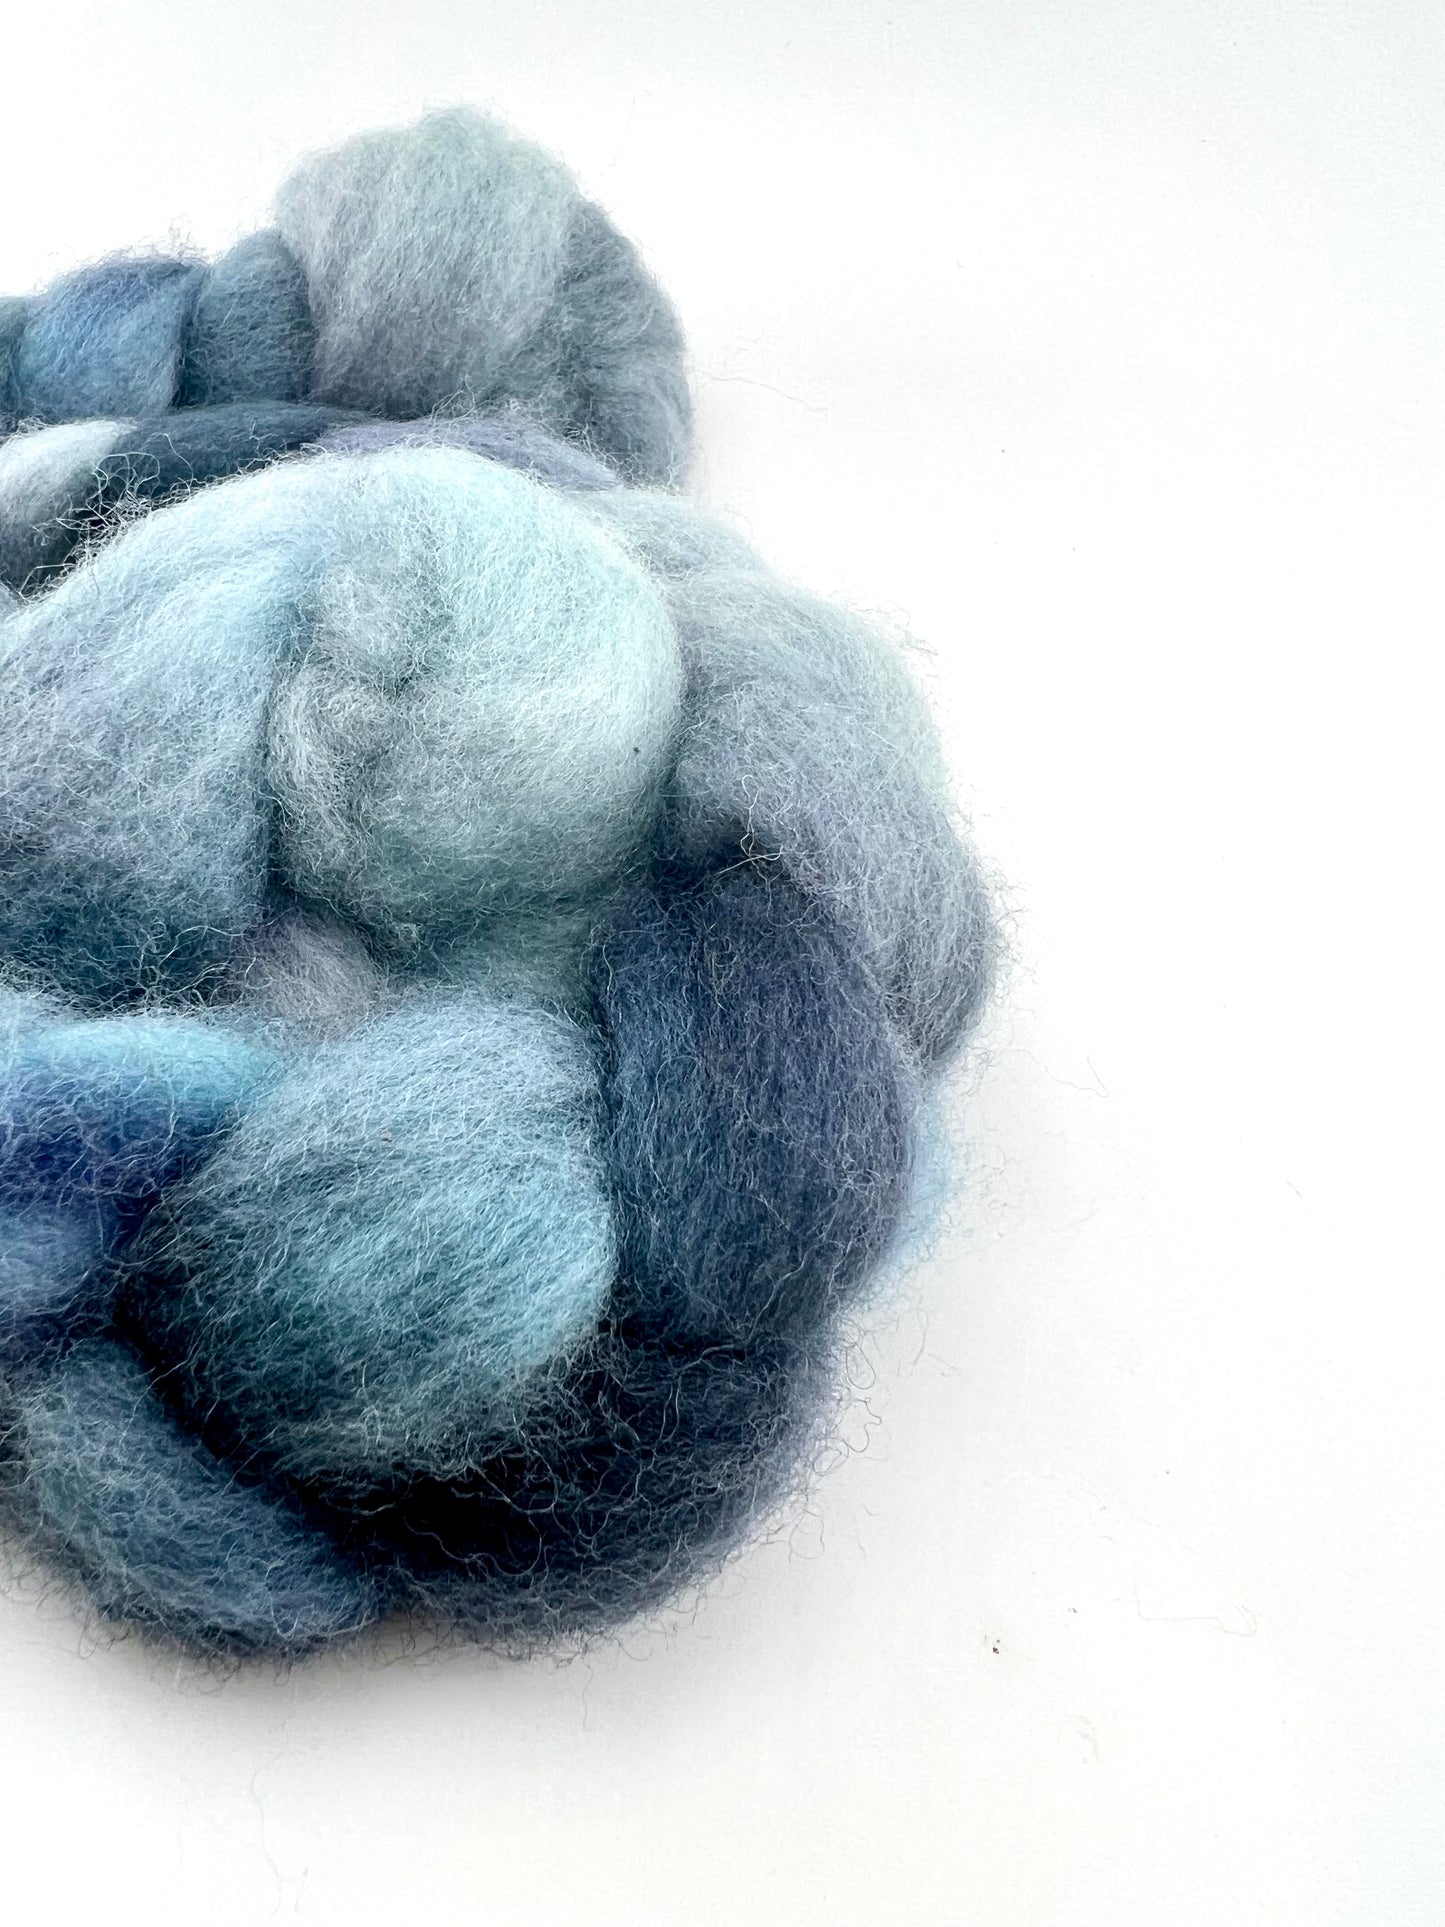 SNACK SIZE Hand Dyed Spinning Fibre Purple Blue Corriedale Top Non Superwash